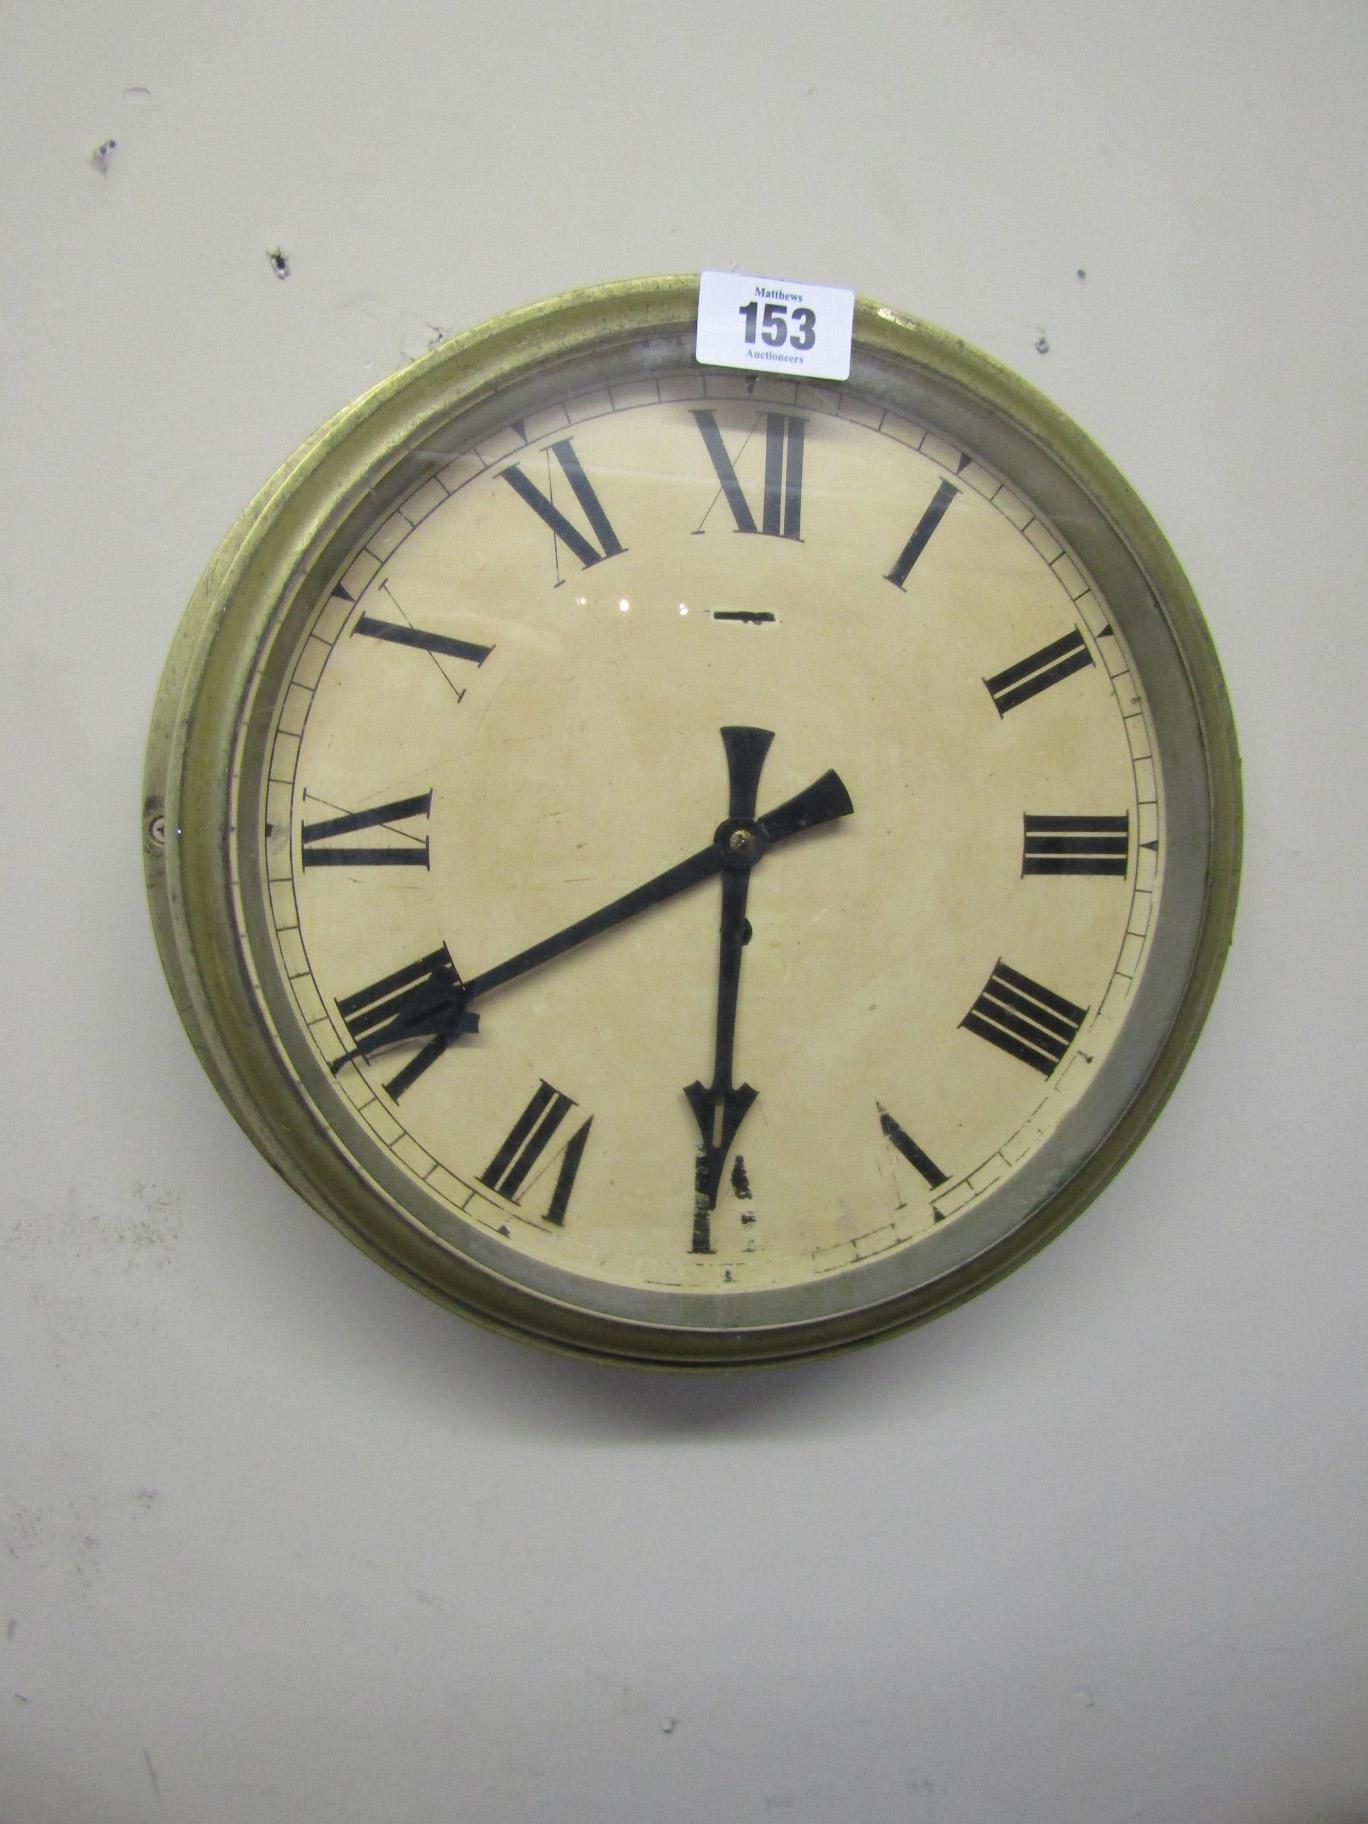 Antique Brass Bound Ships Clock of Large Size with Roman Numeral Decorated Dial 14 Inches Wide - Image 2 of 2